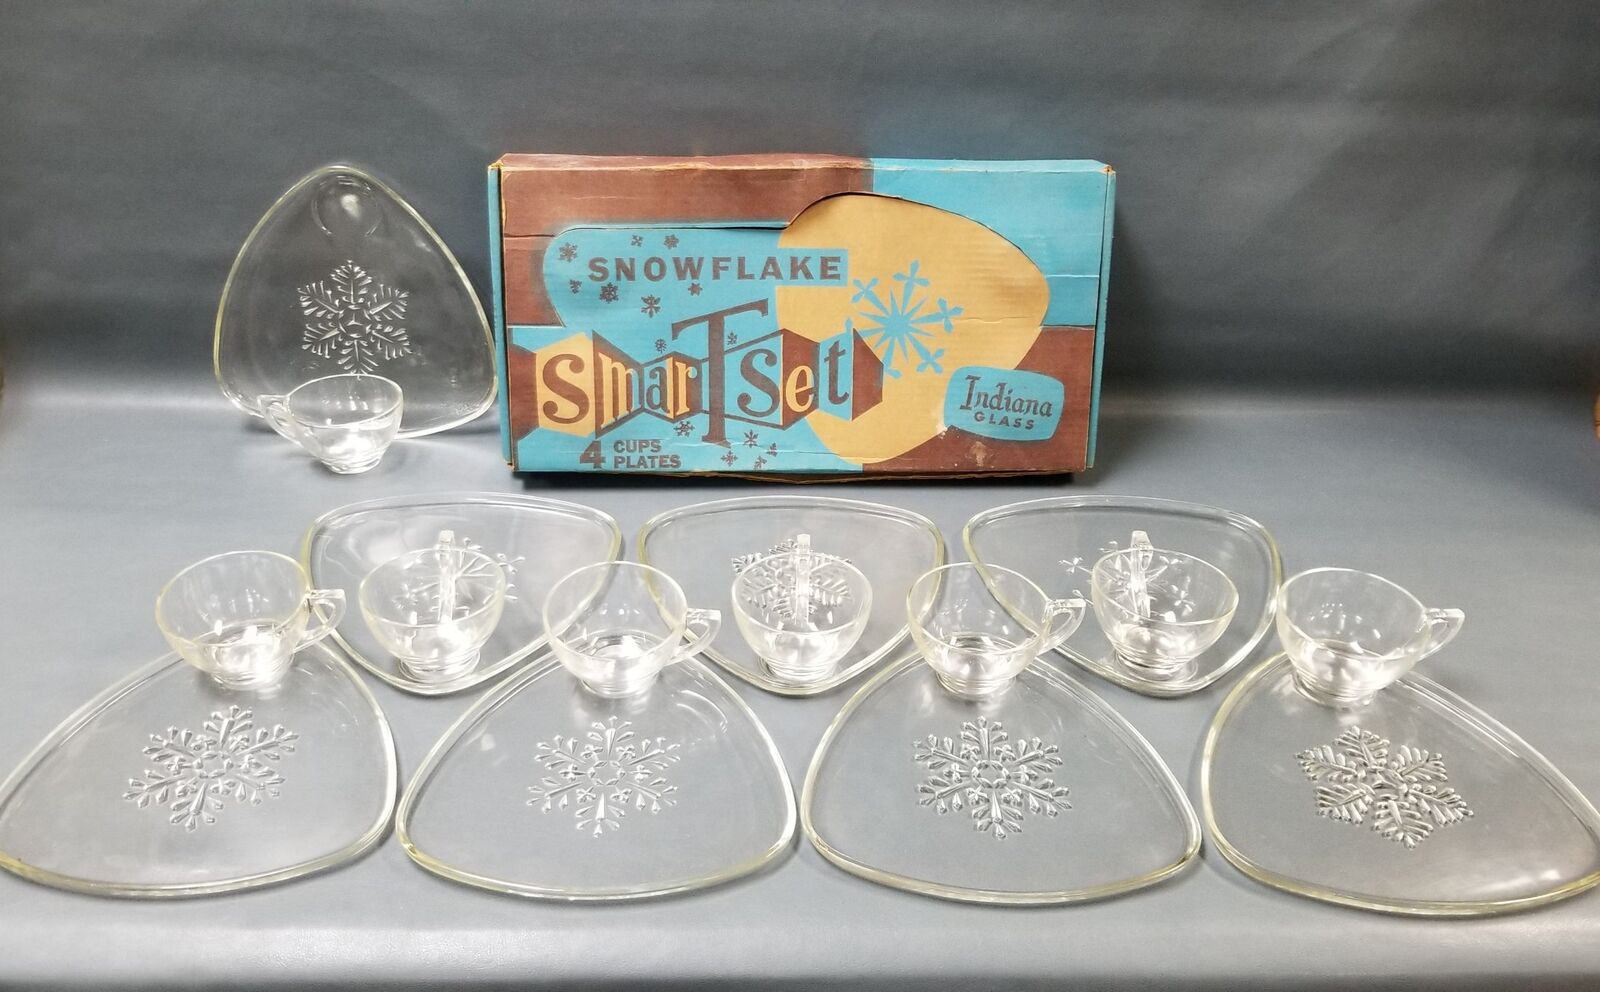 Vintage Indiana Glass Snowflake Smart set, Snack Set, Set of 8 cups and plates